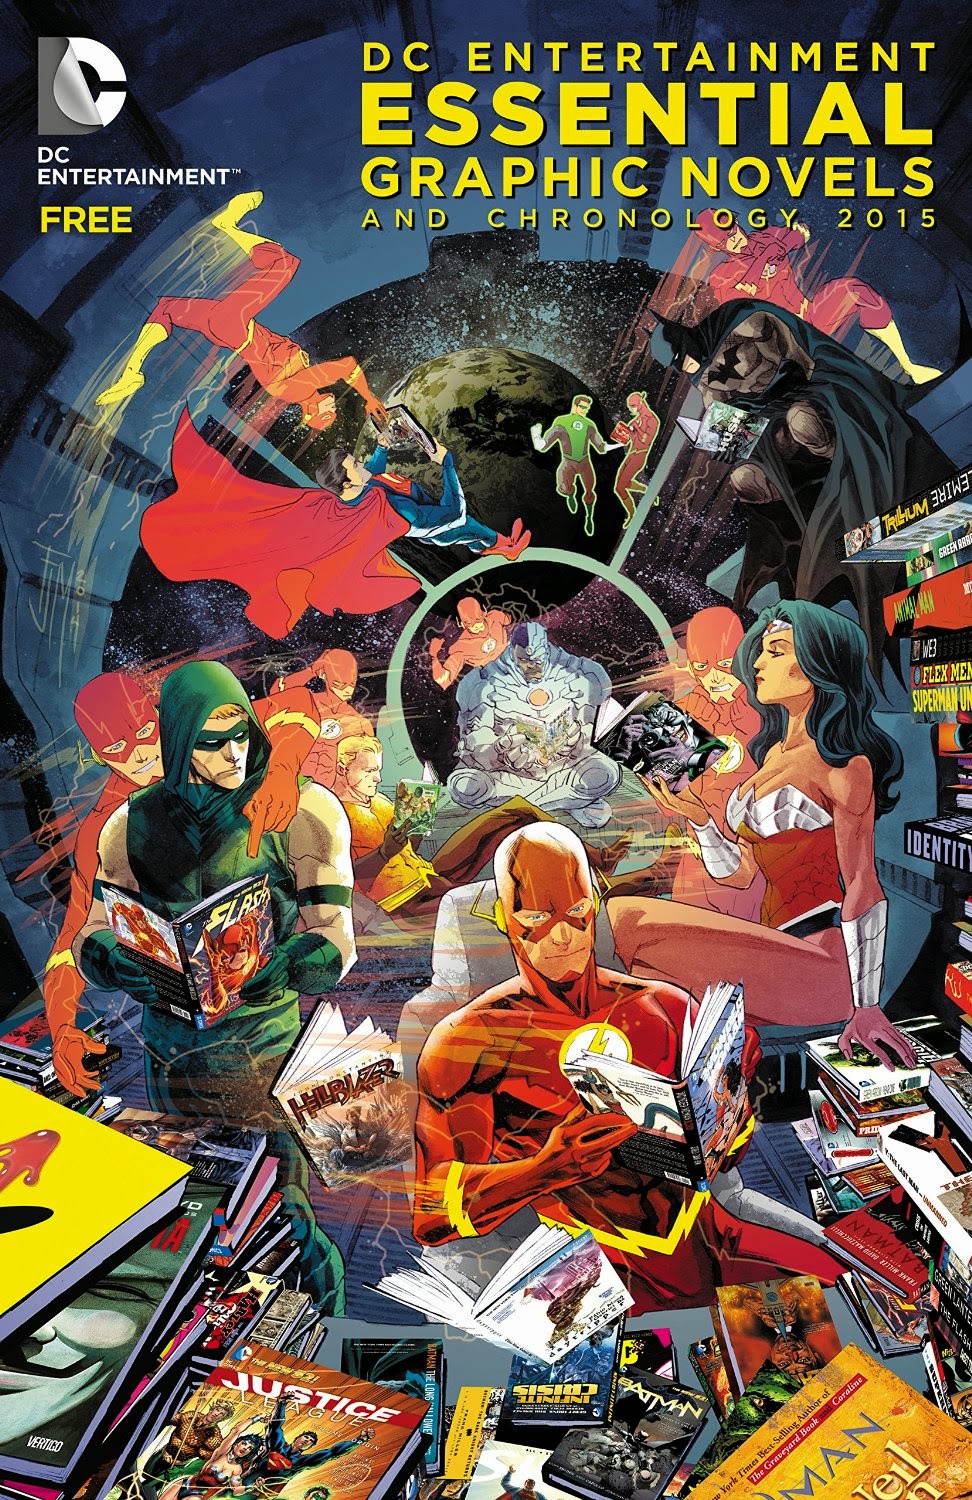 Review: DC Entertainment Essential Graphic Novels and Chronology 2015